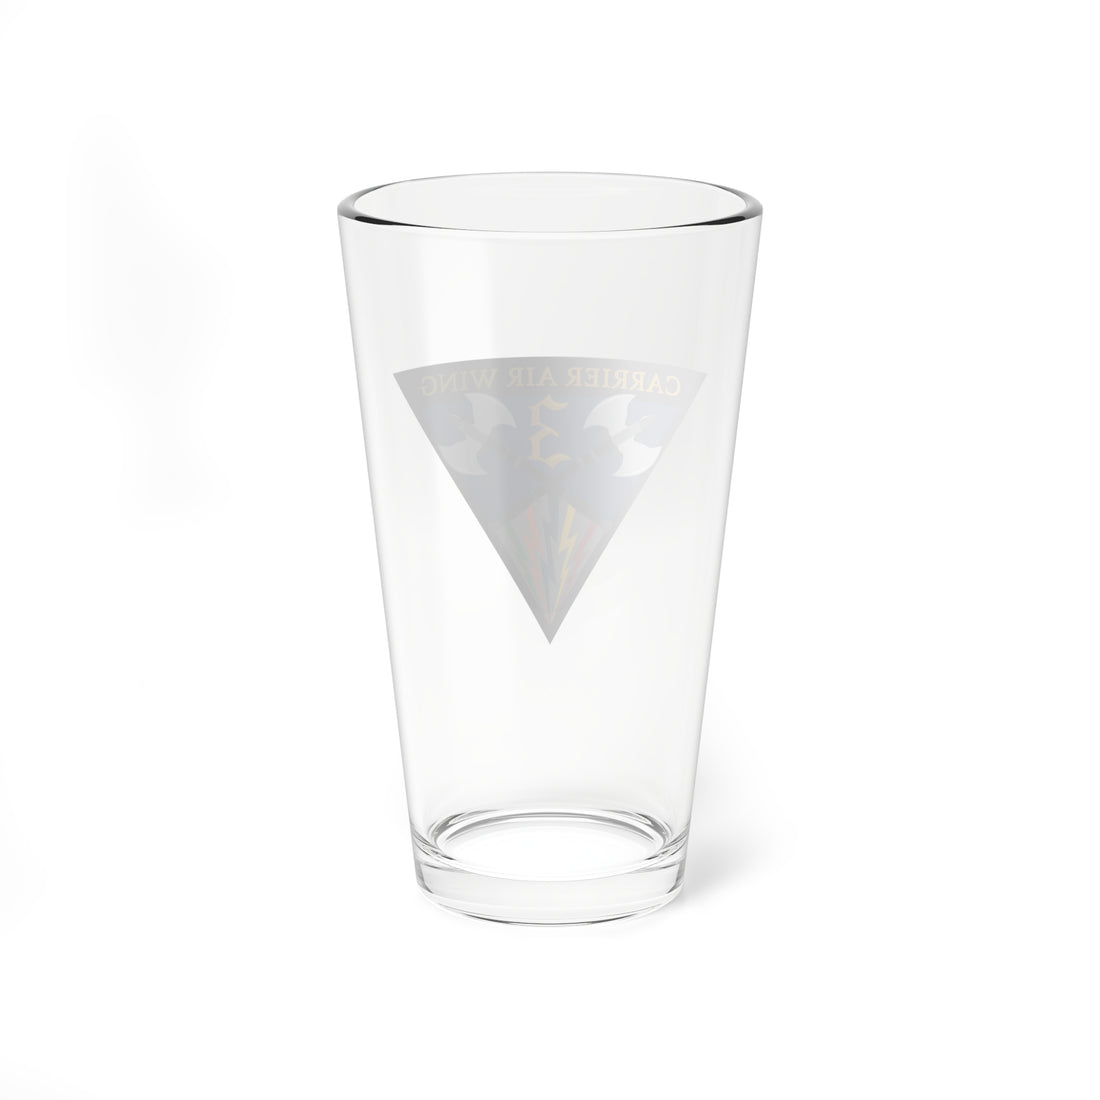 CVW-3 Current Logo Pint Glass, Navy Carrier Air Wing Three